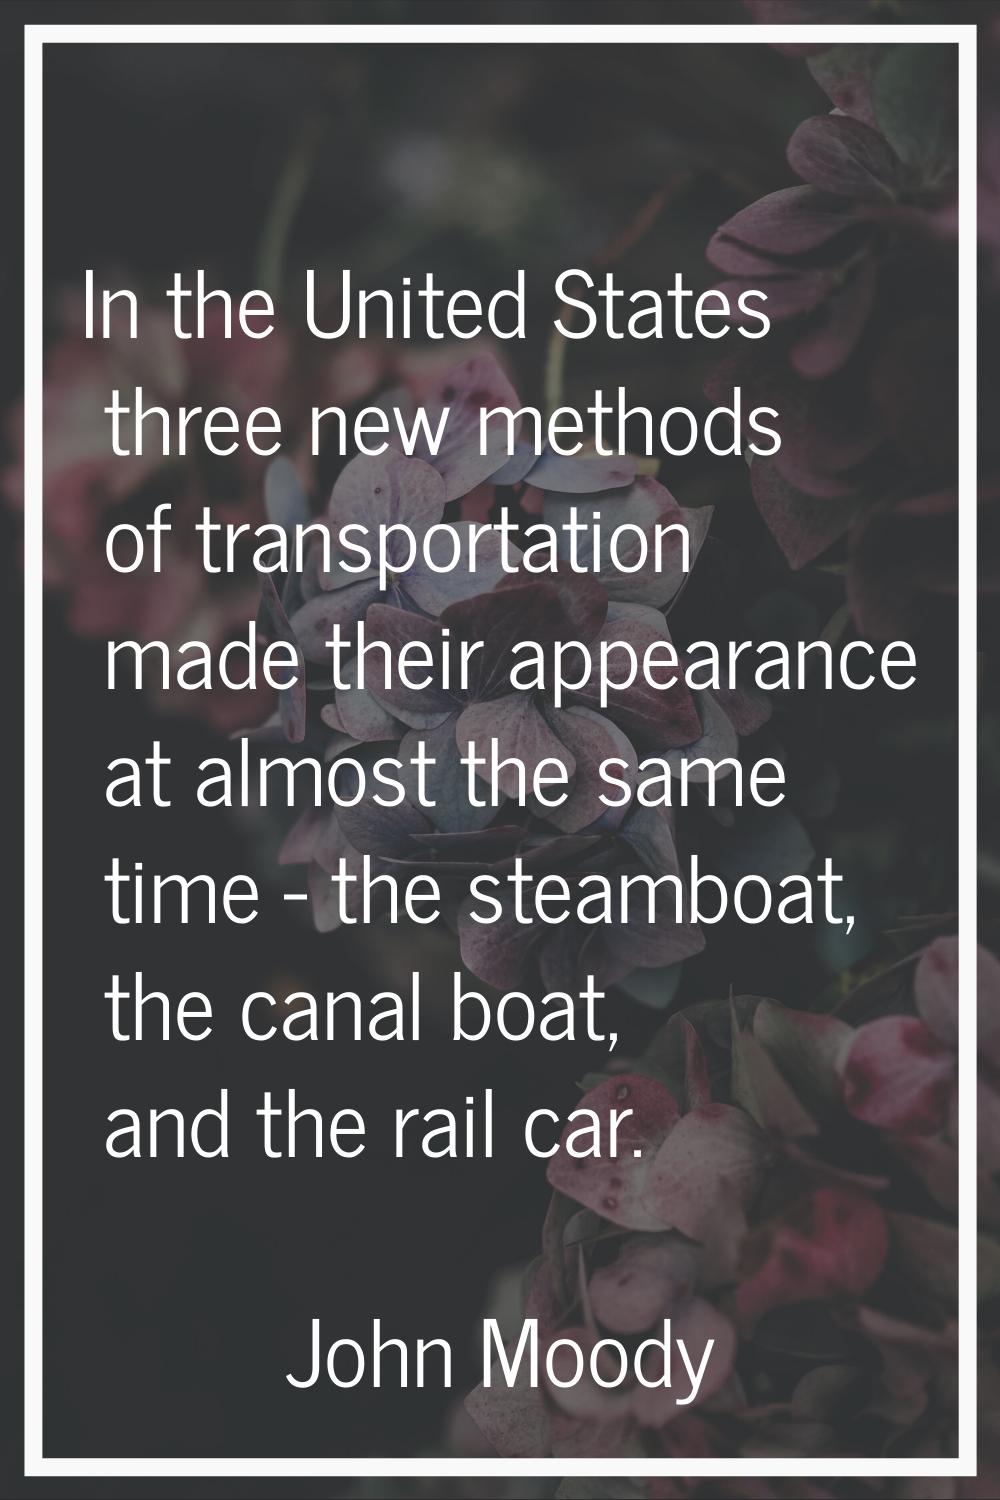 In the United States three new methods of transportation made their appearance at almost the same t